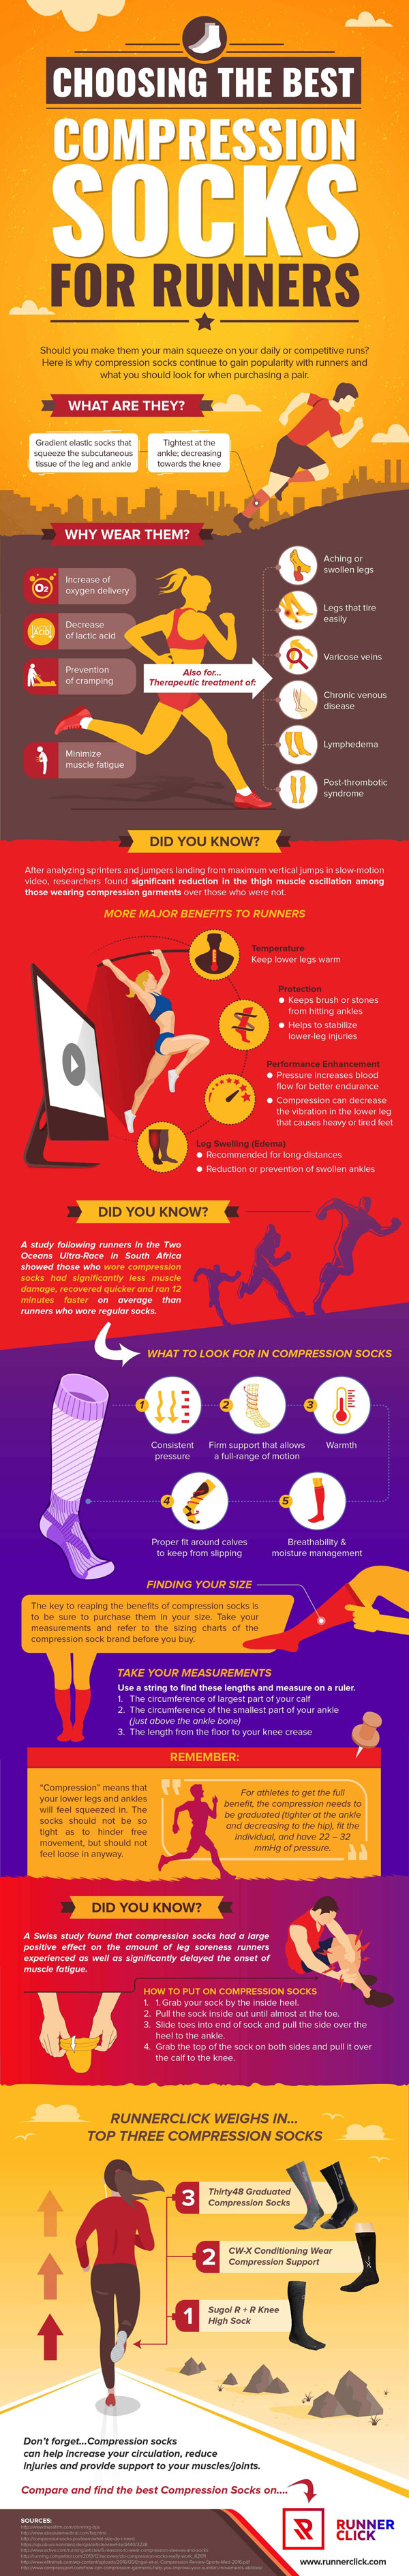 Choosing the Best Compression Socks {Infographic} - Best Infographics